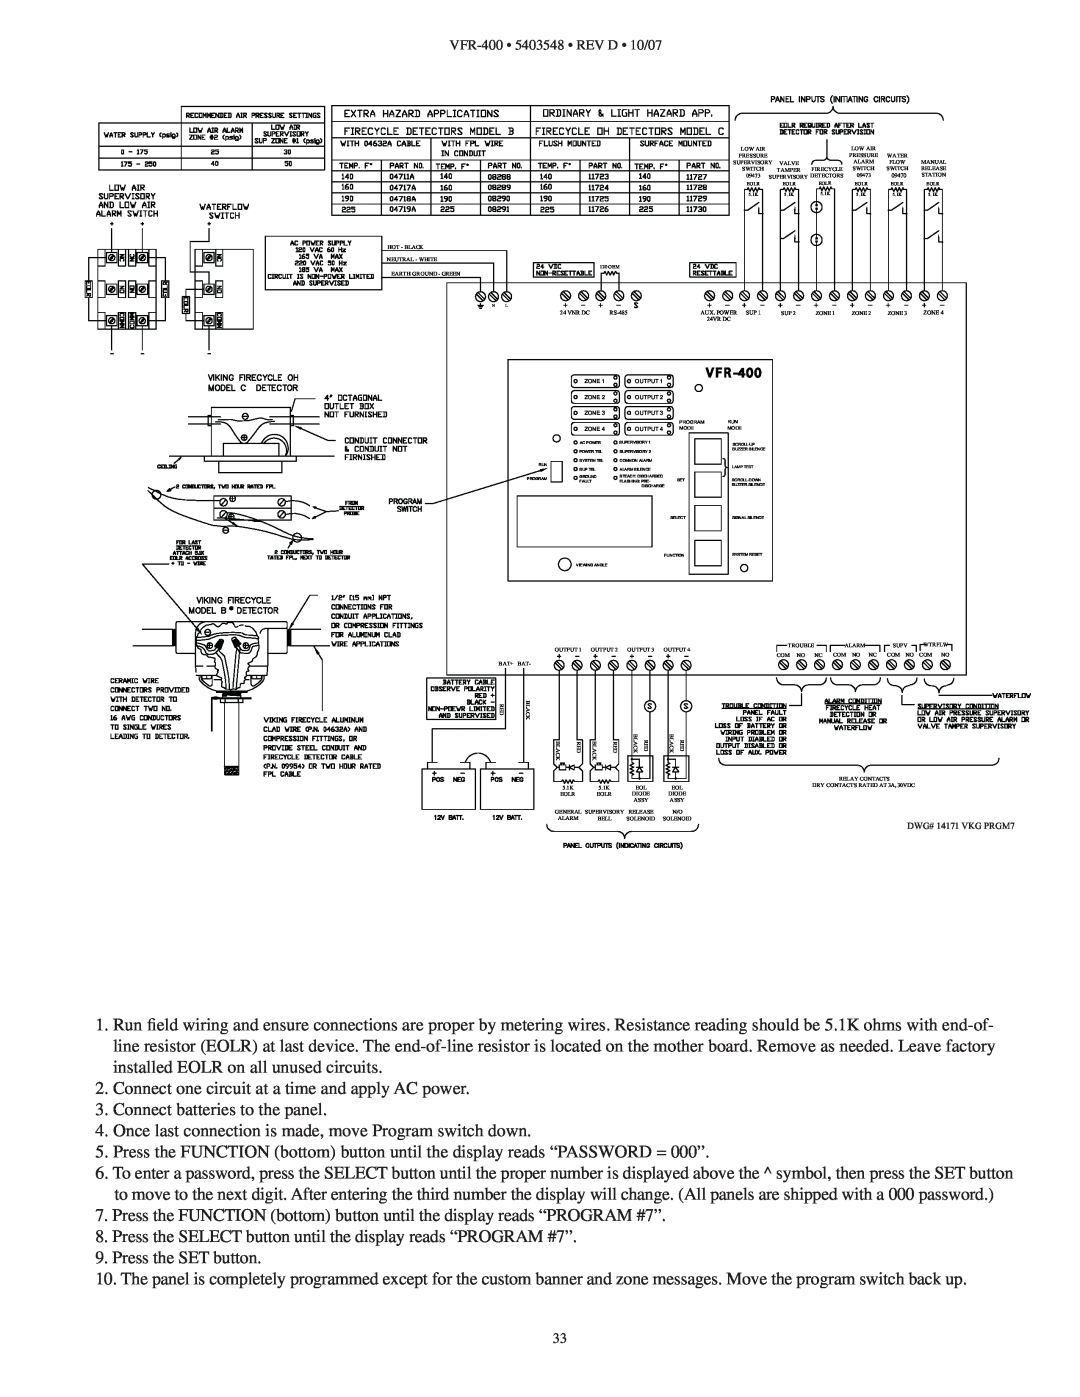 Viking VFR-400 instruction manual Connect one circuit at a time and apply AC power 